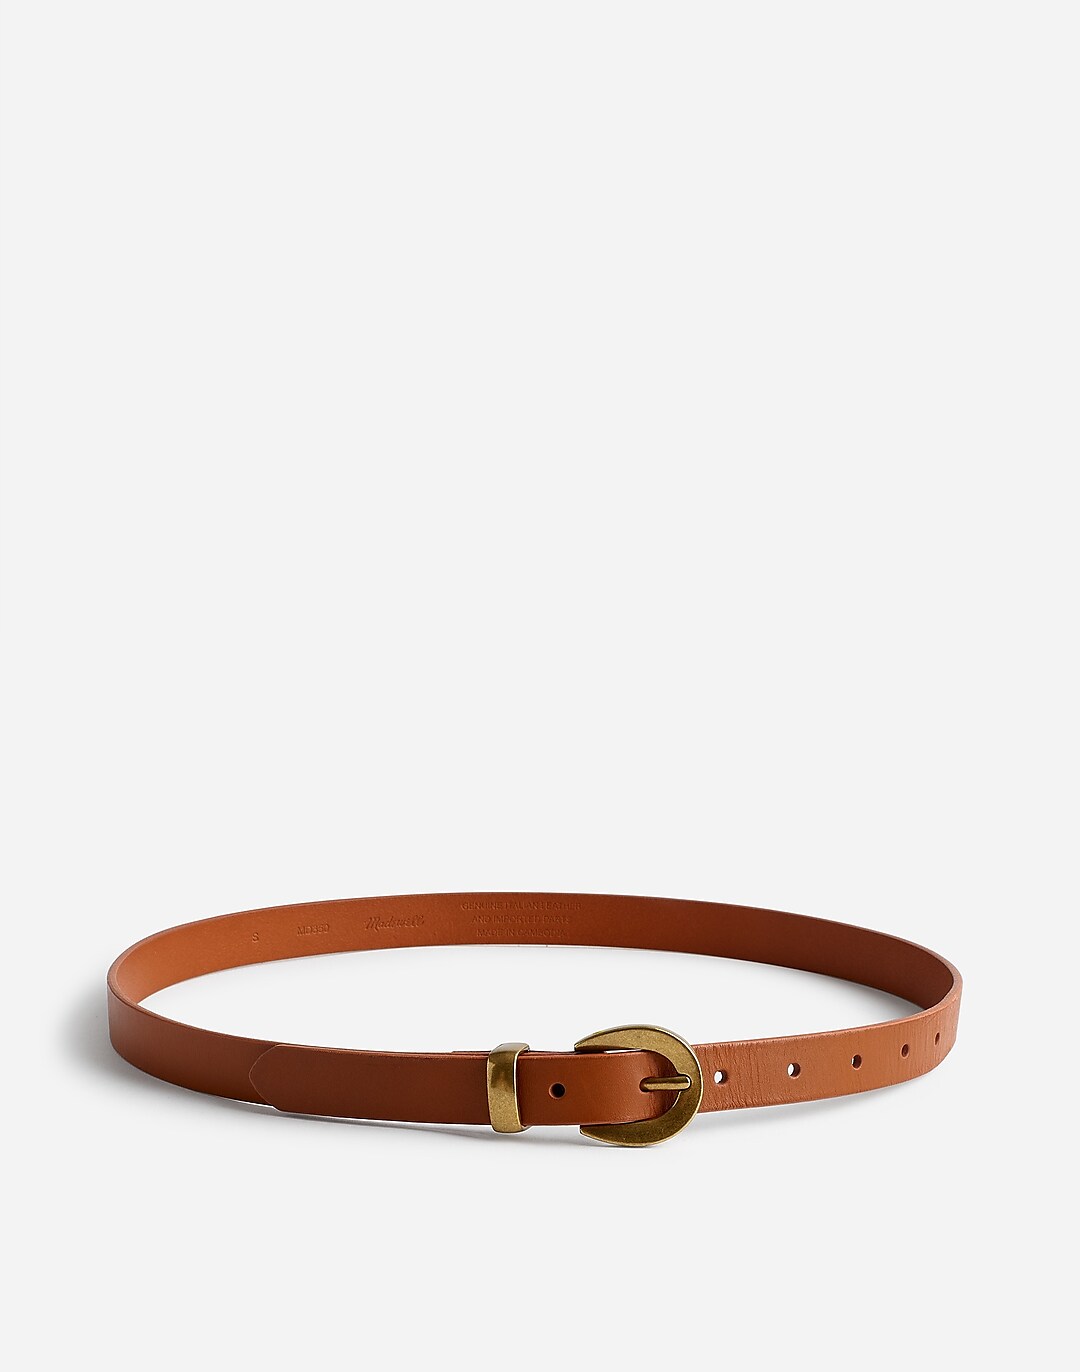 Madewell Chunky Buckle Skinny Leather Belt in Desert Camel - Size S